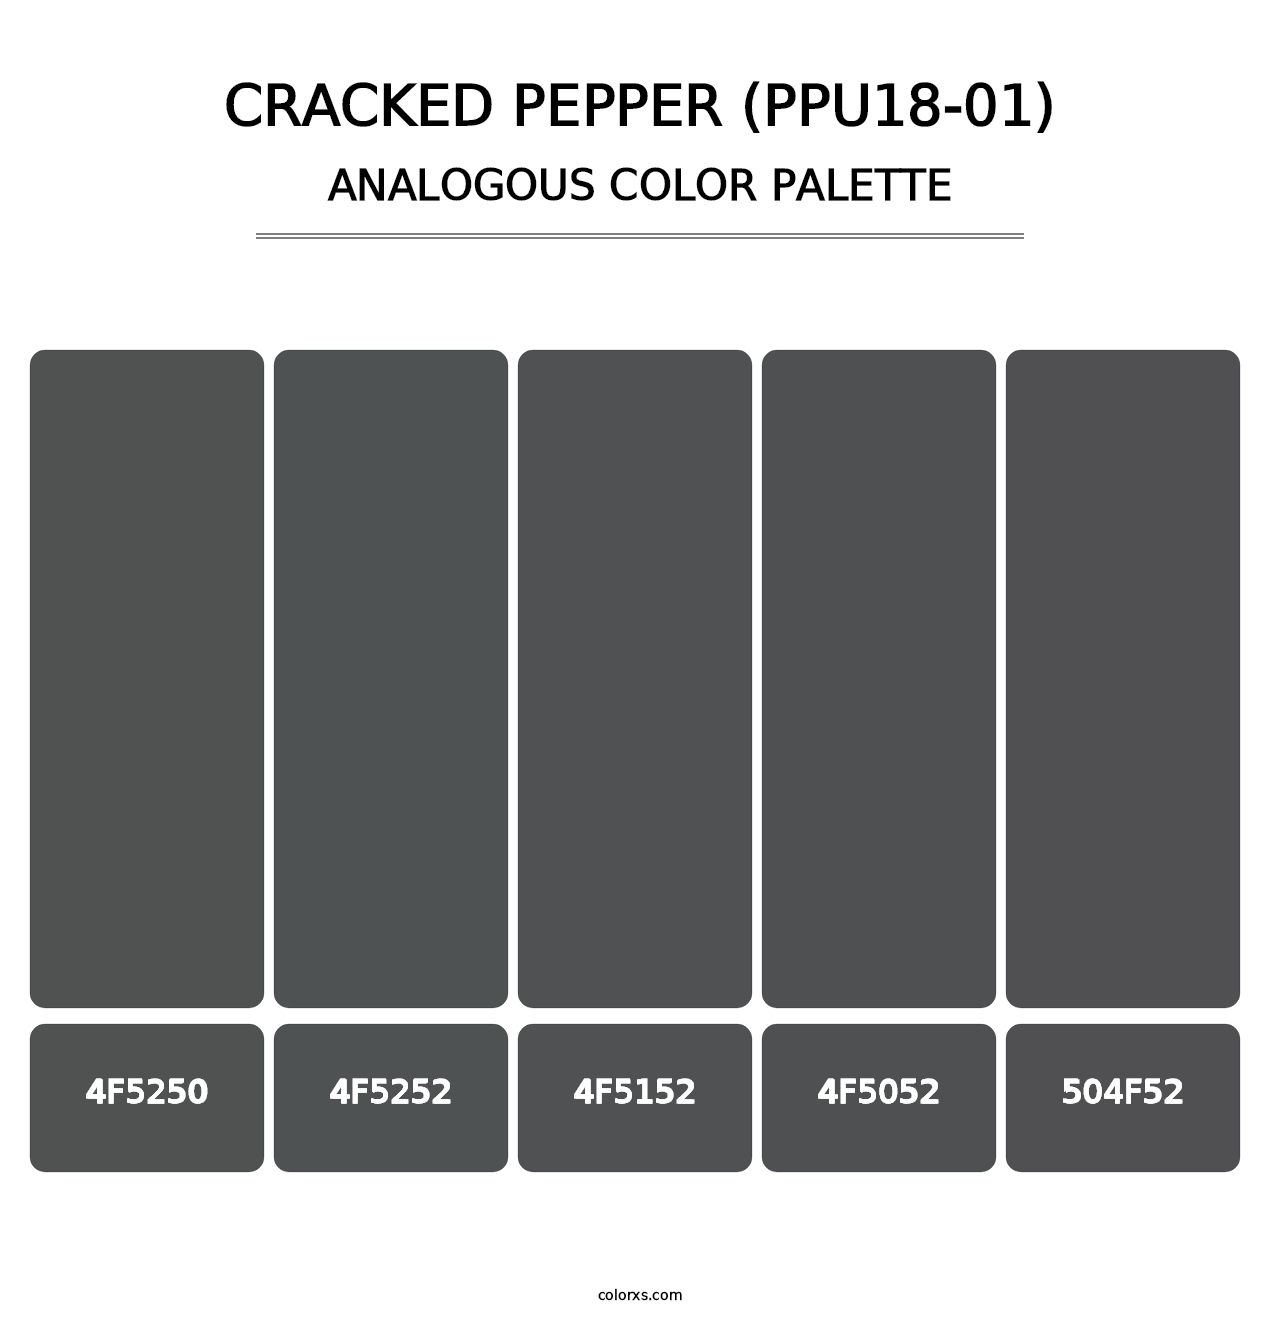 Cracked Pepper (PPU18-01) - Analogous Color Palette